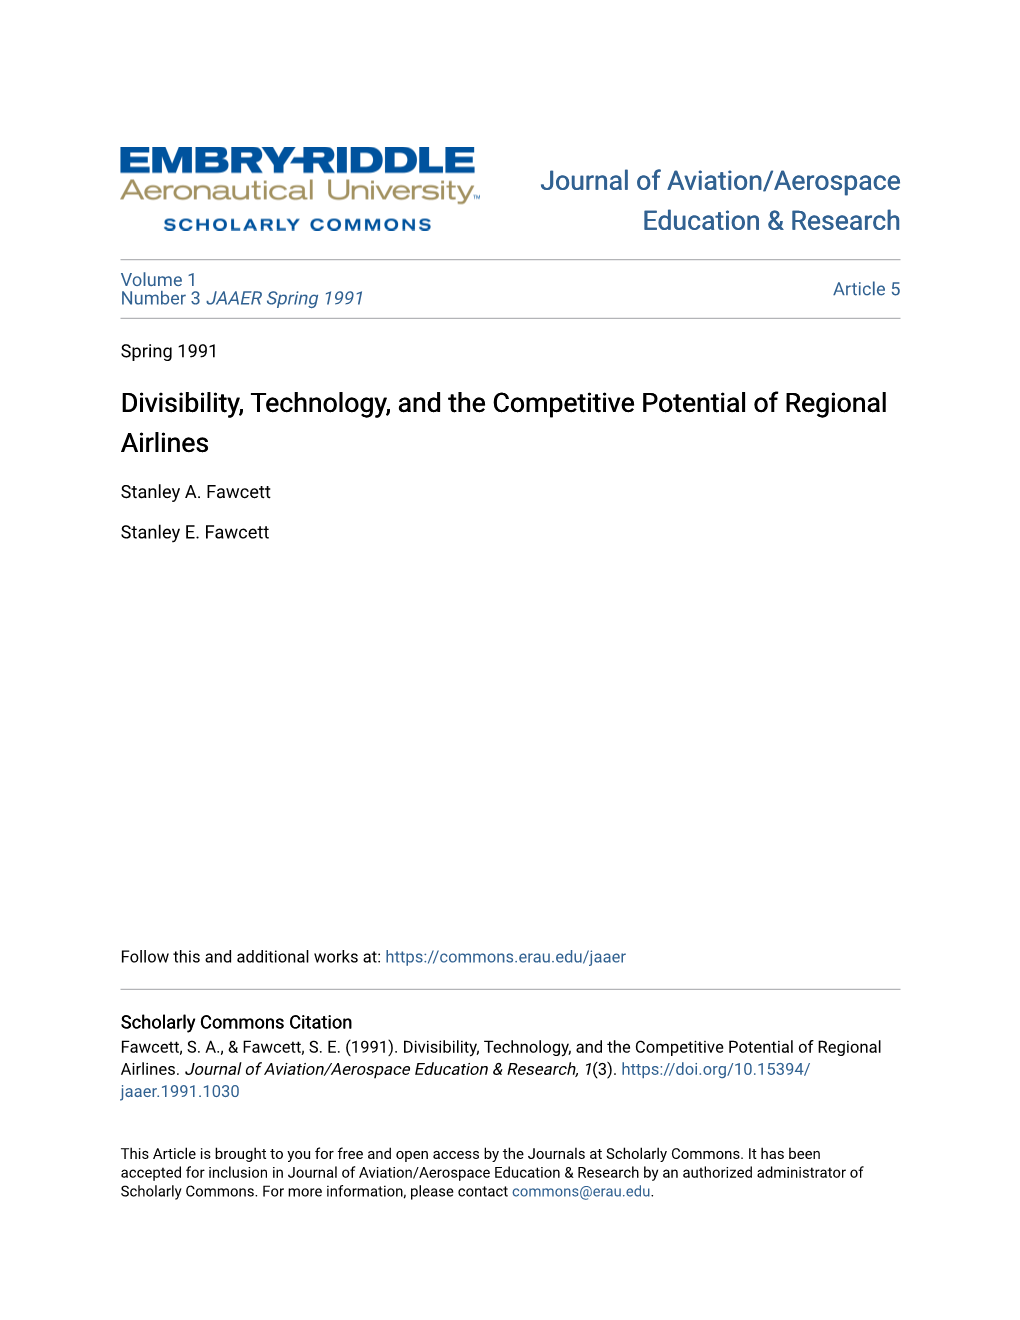 Divisibility, Technology, and the Competitive Potential of Regional Airlines